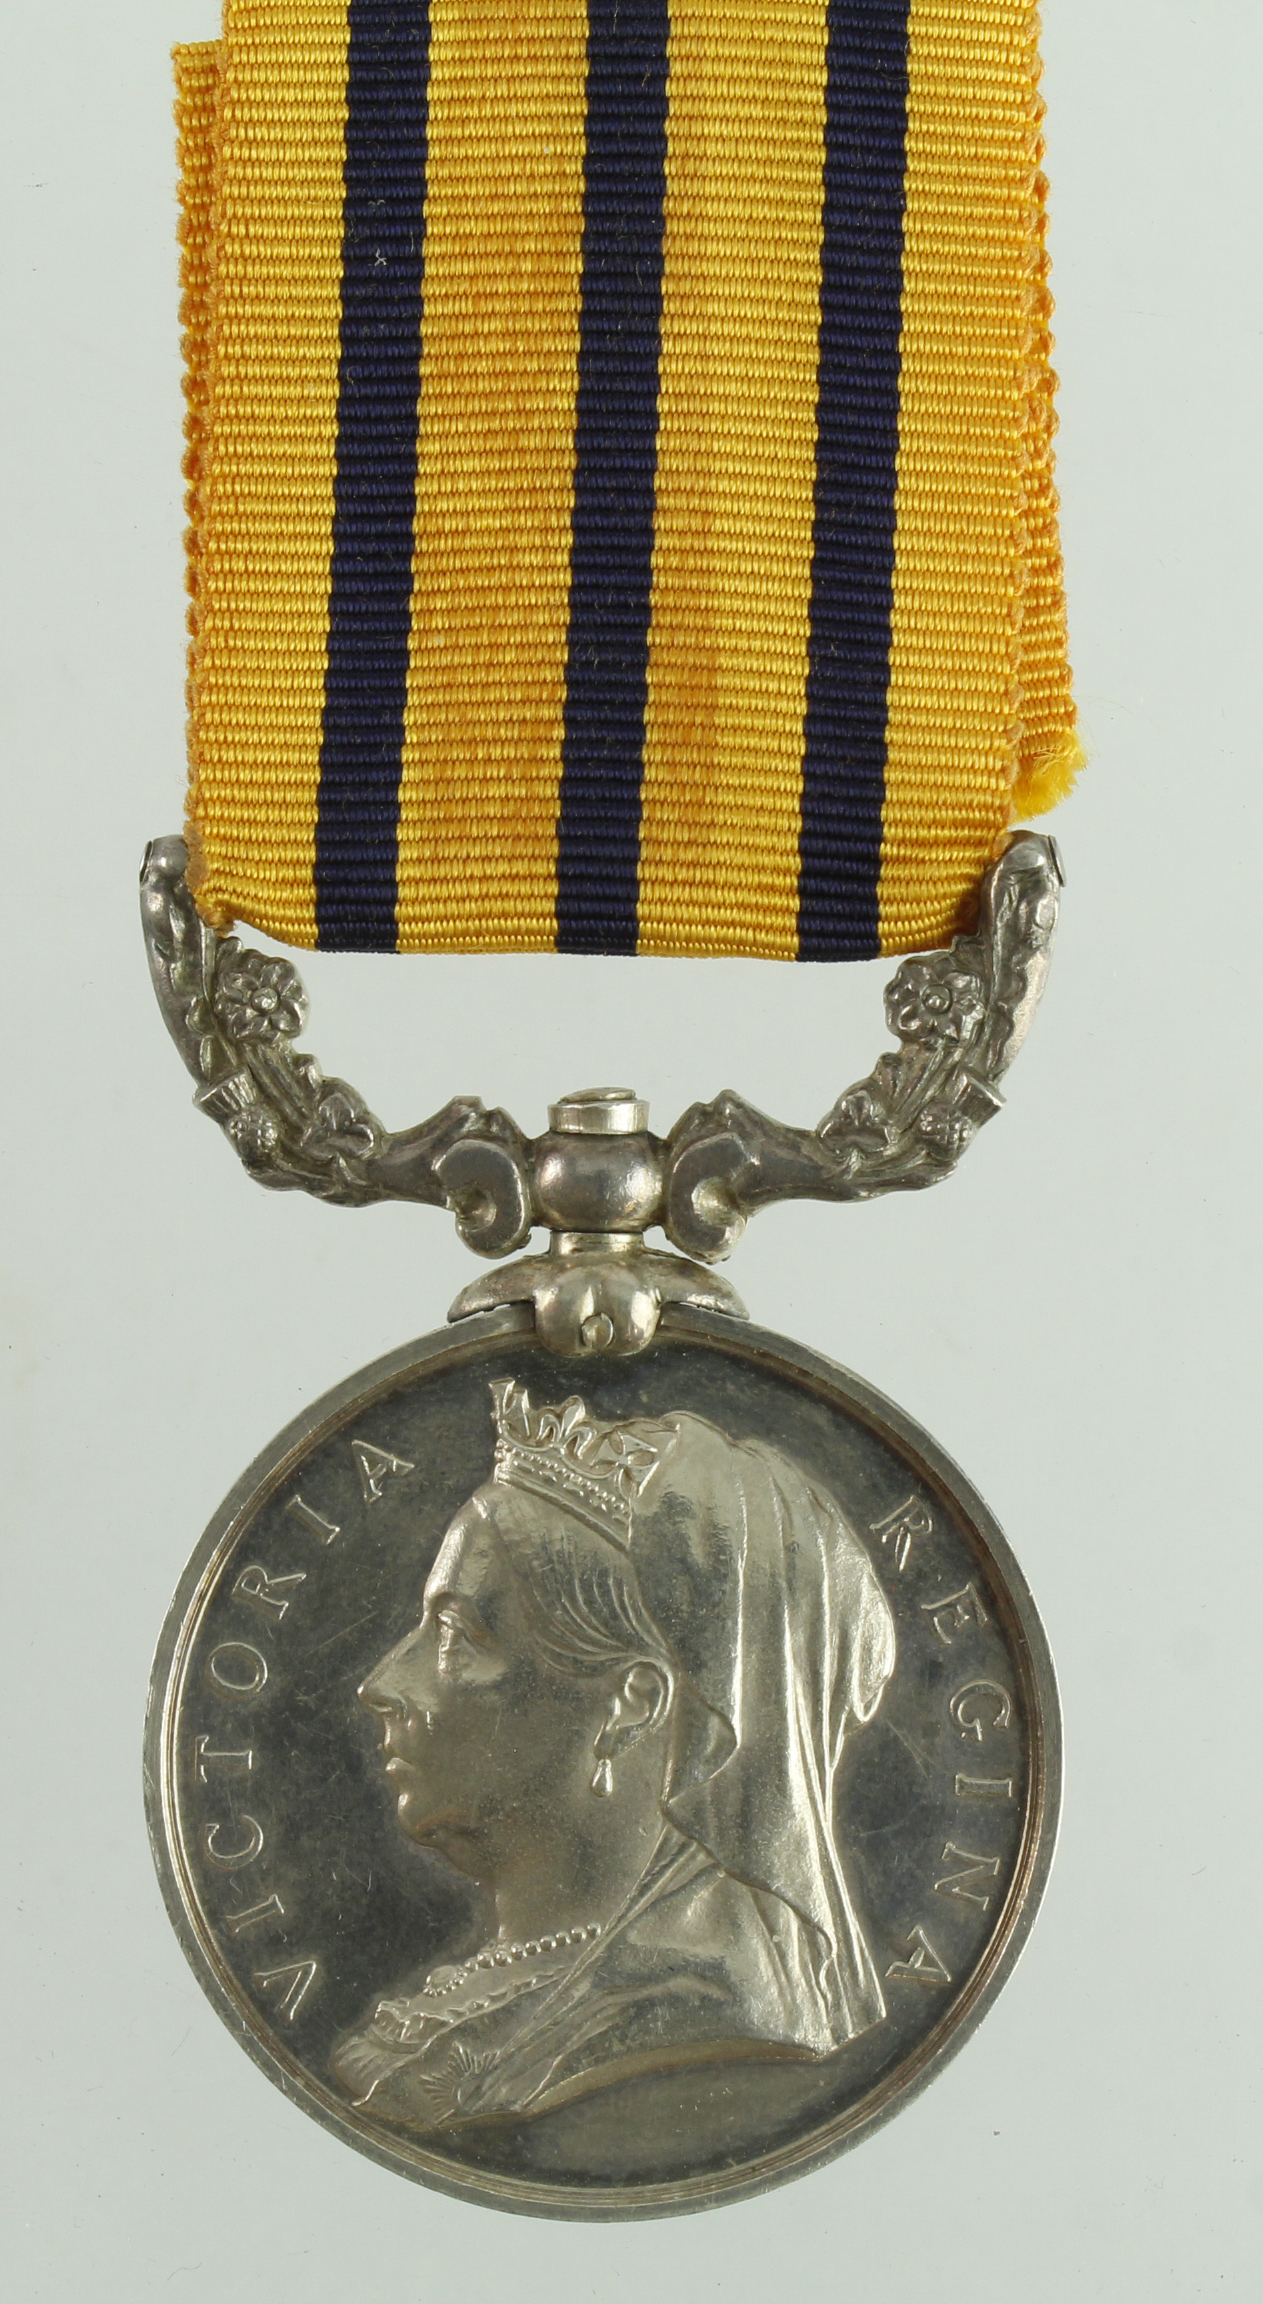 British South Africa Company's Medal 1896, with Rhodesia 1896 reverse, named (Troopr F J Tieinan B.